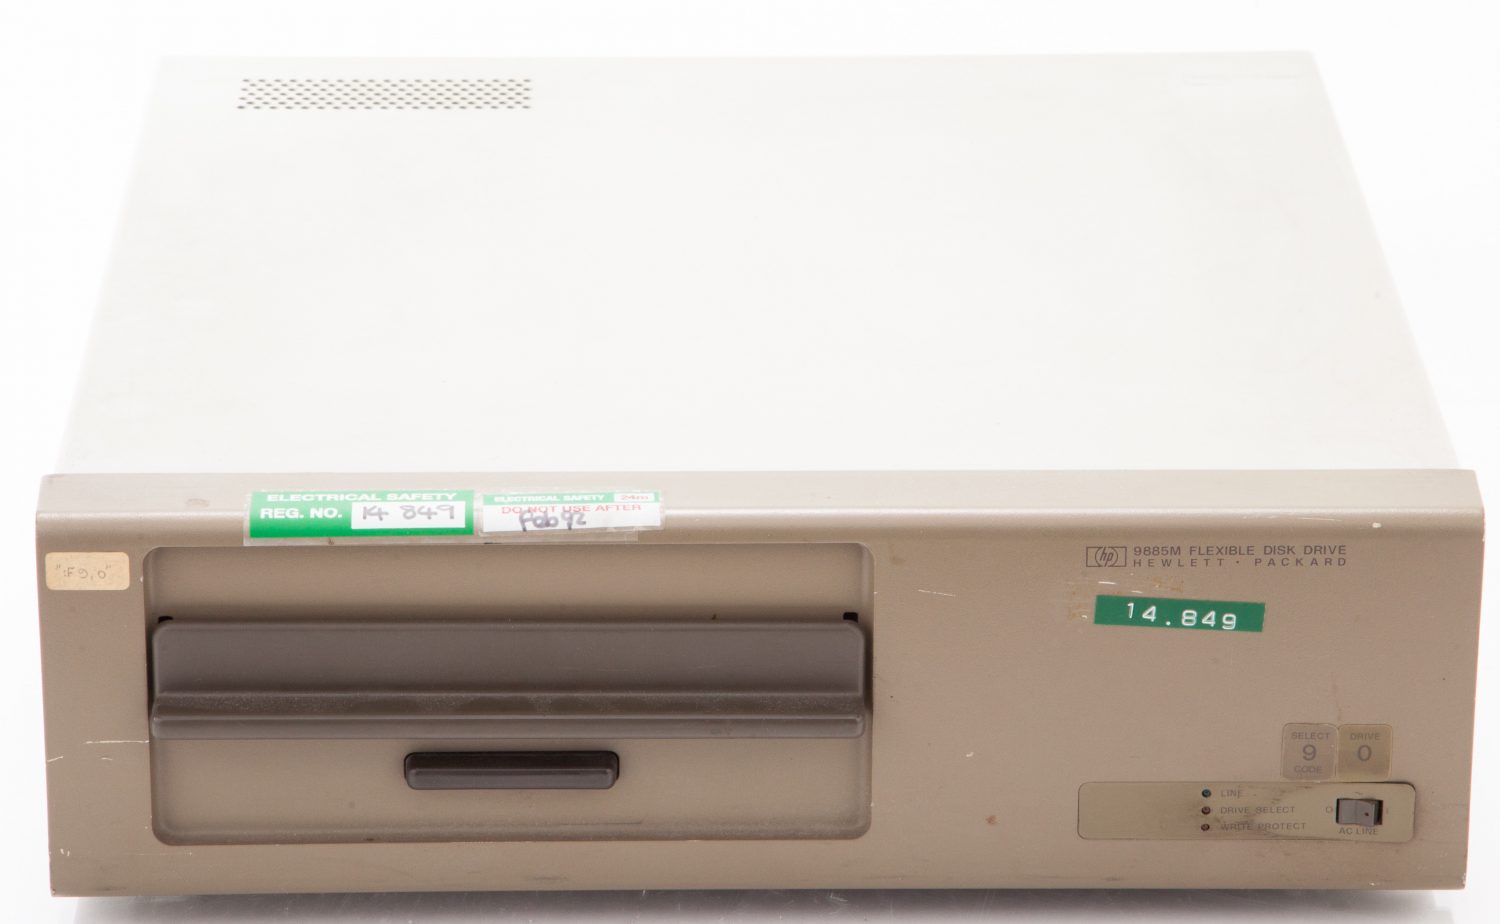 Front of the HP 9855M floppy disk drive.